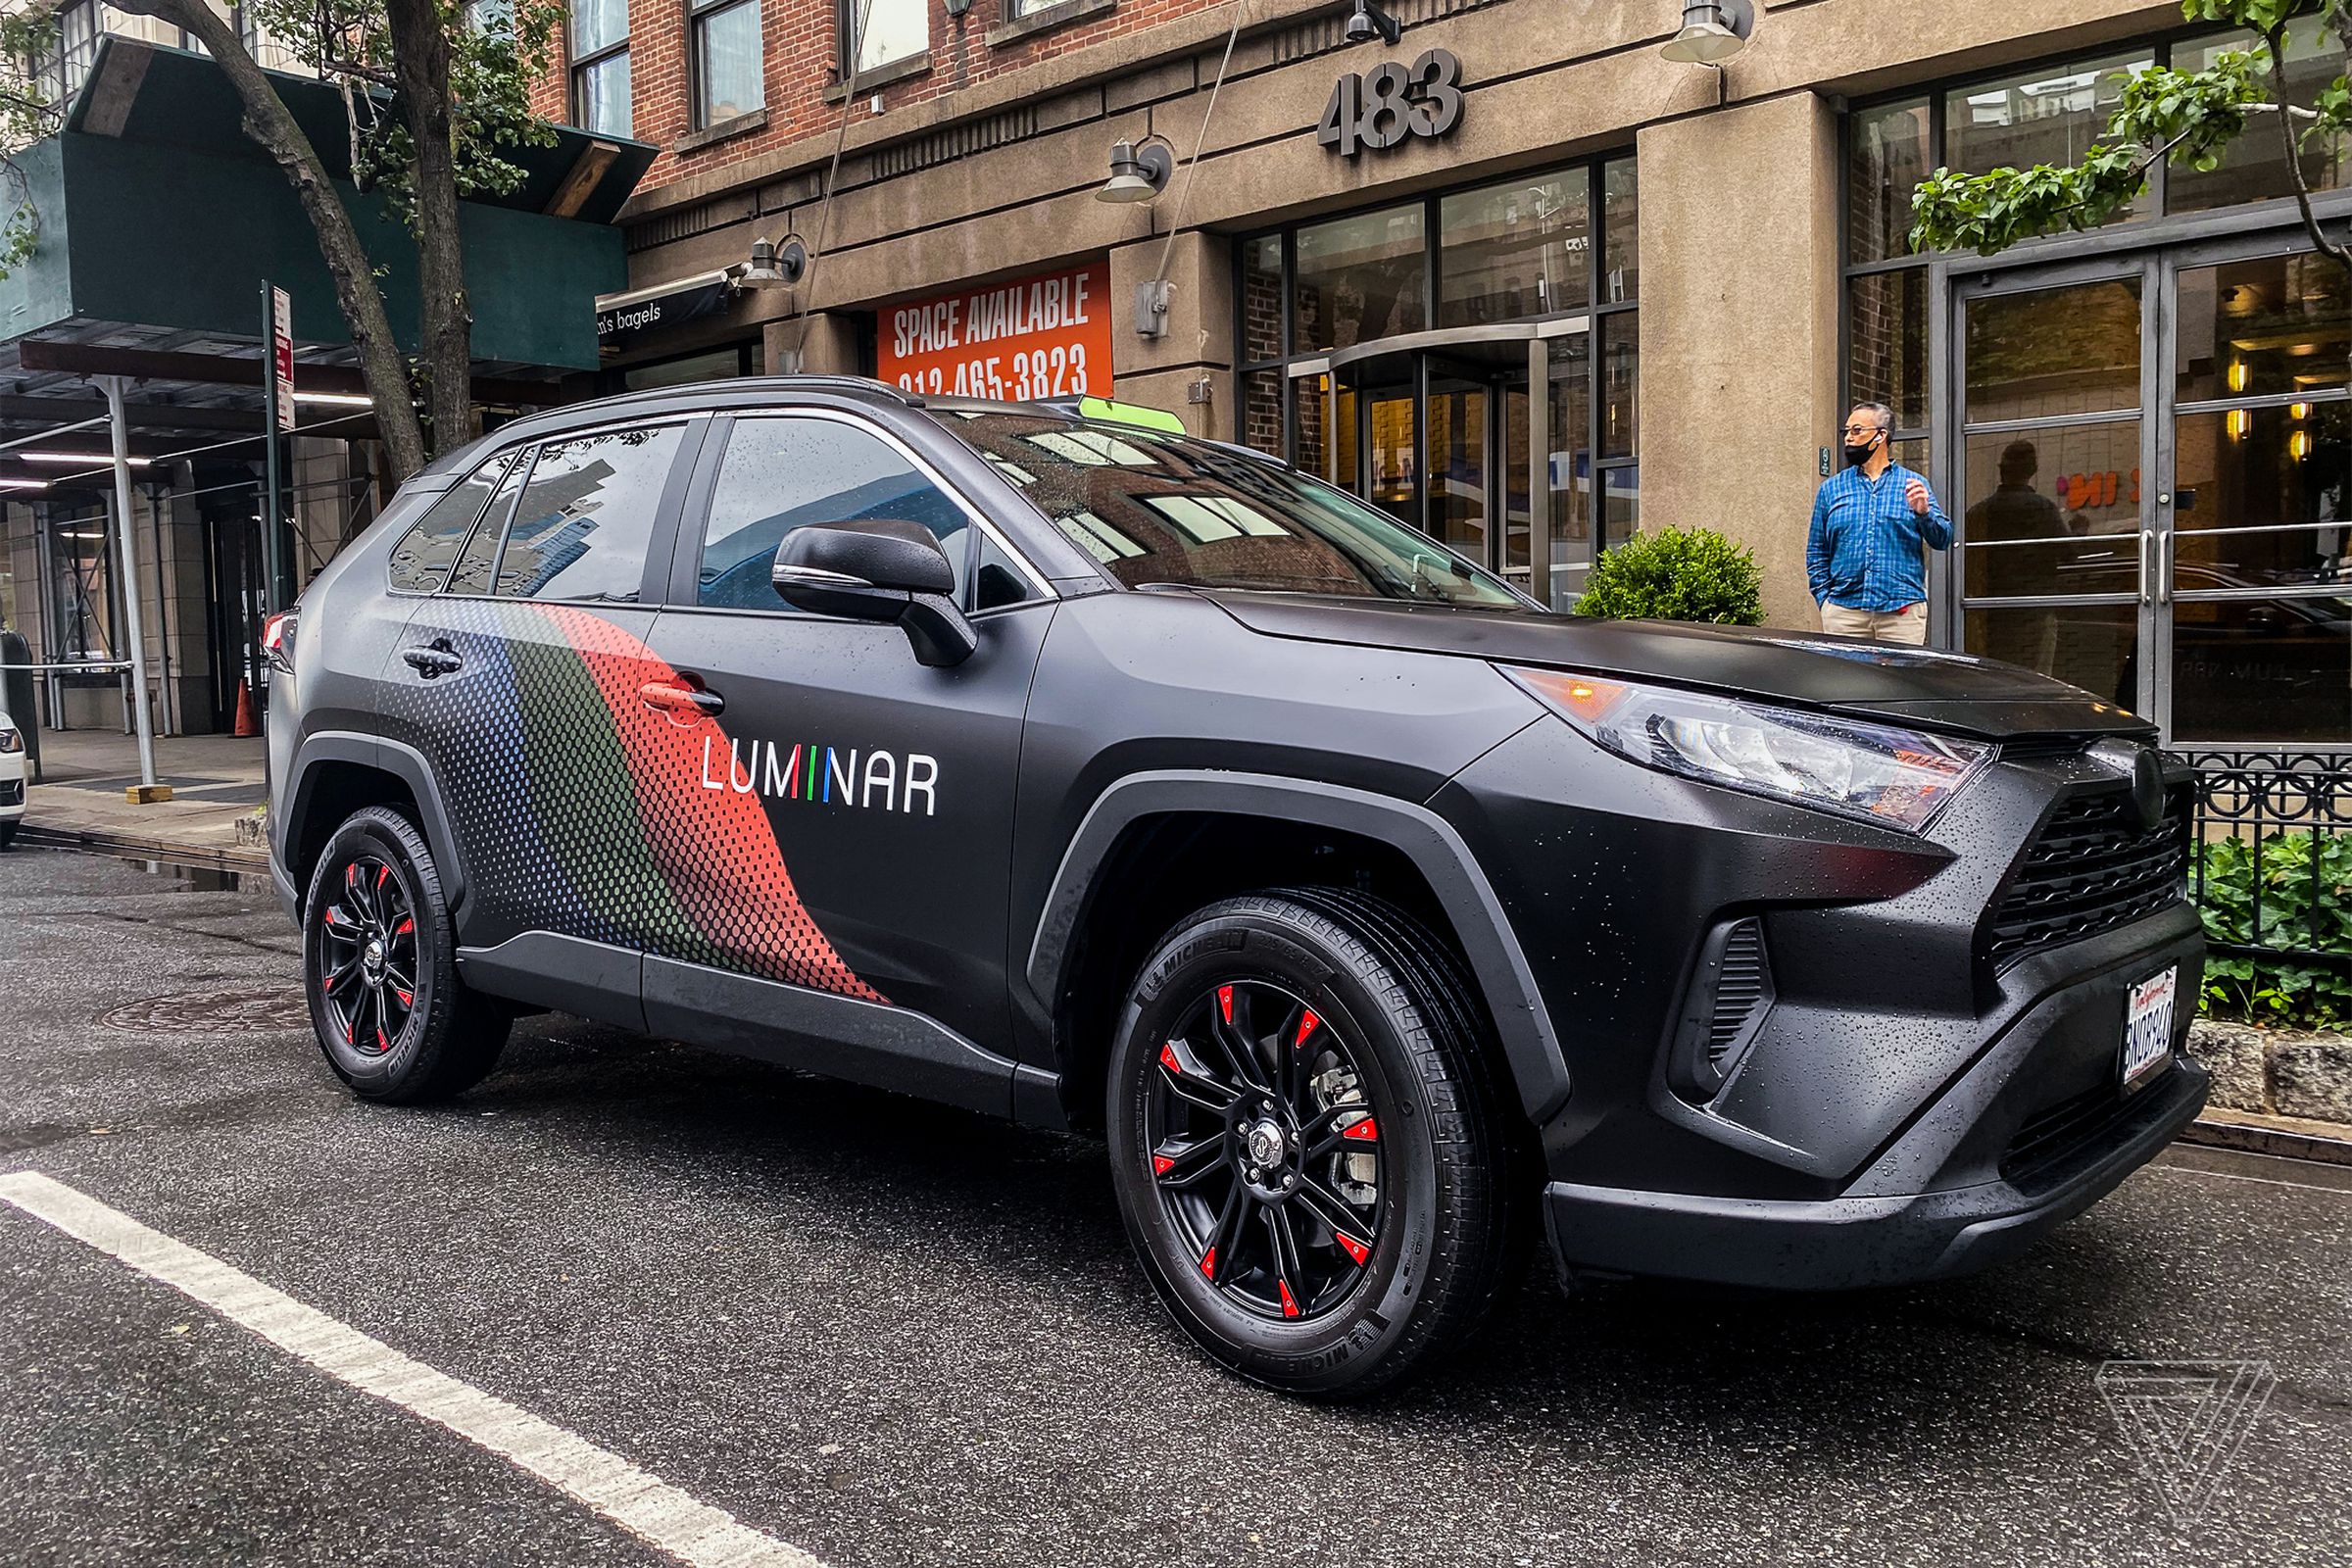 a black SUV is on a city street with the Luminar logo printed on its side.